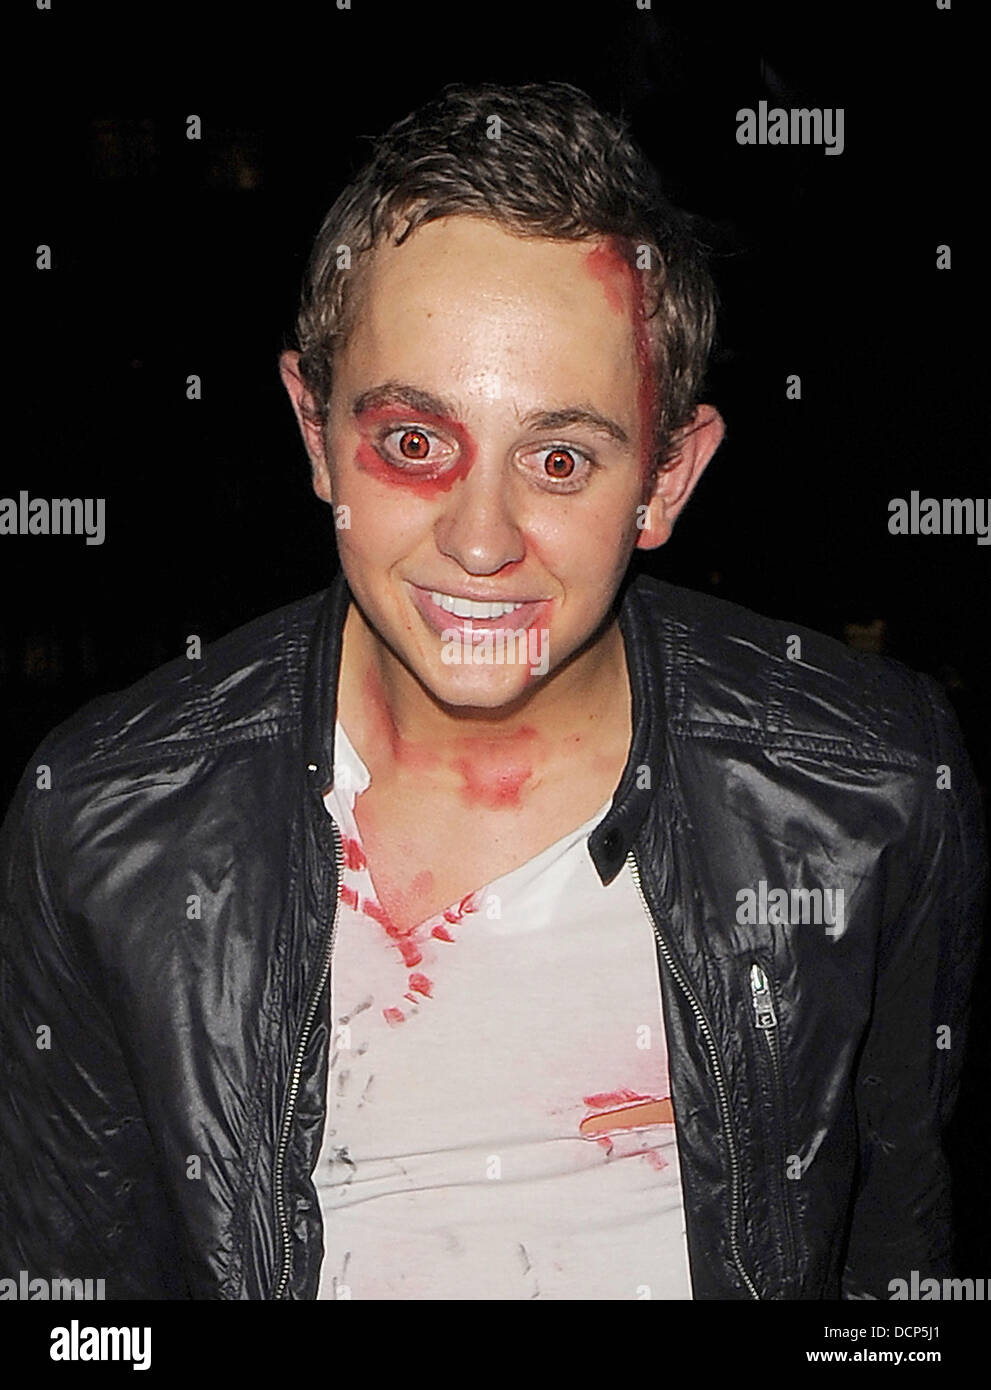 George Lineker leaves a Halloween party, held in Cavendish Square with a female companion. - george-lineker-leaves-a-halloween-party-held-in-cavendish-square-with-DCP5J1